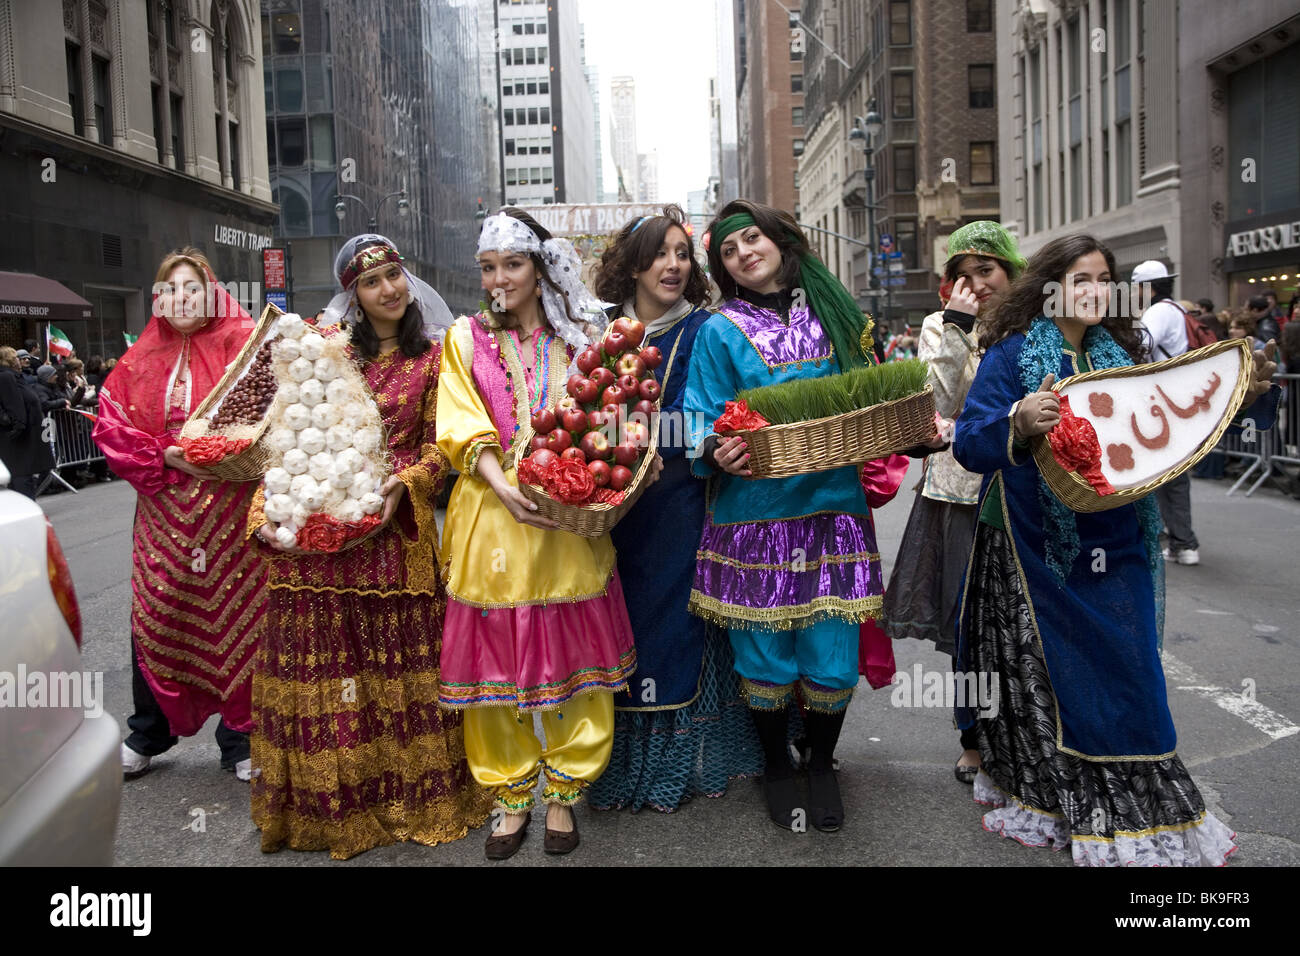 Annual Persian (Iranian) parade on Madison Avenue in New York City